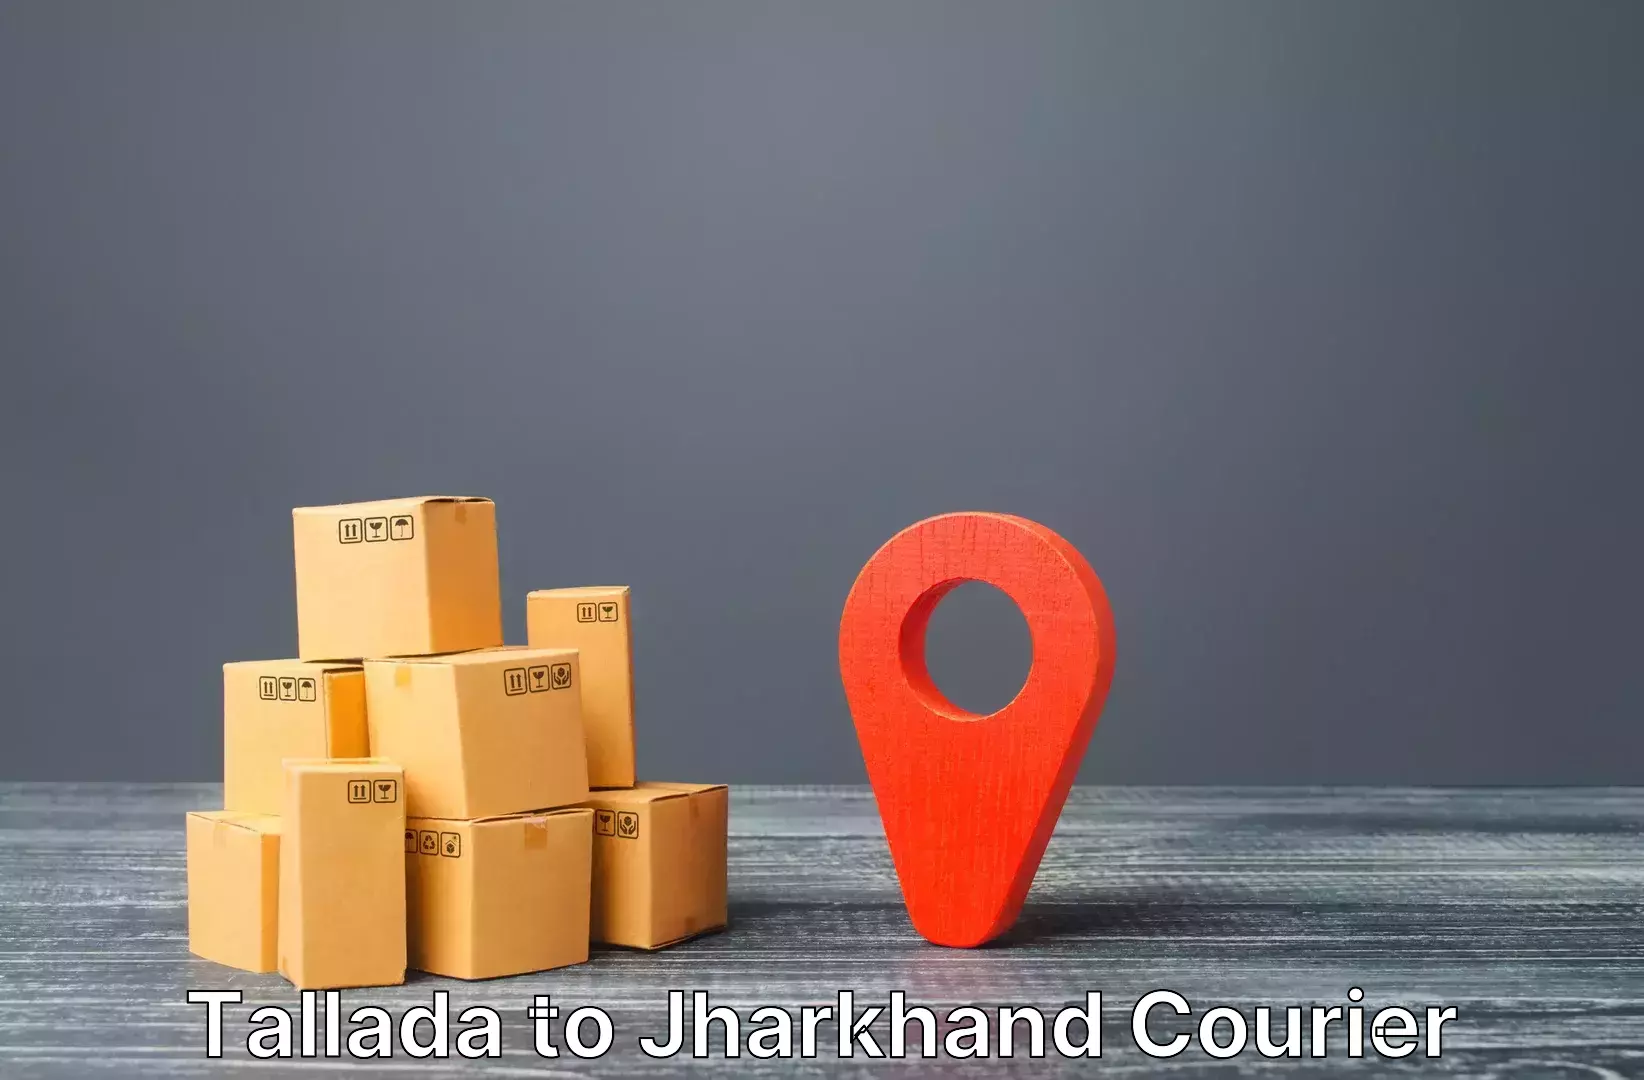 Luggage shipping discounts in Tallada to Jharkhand